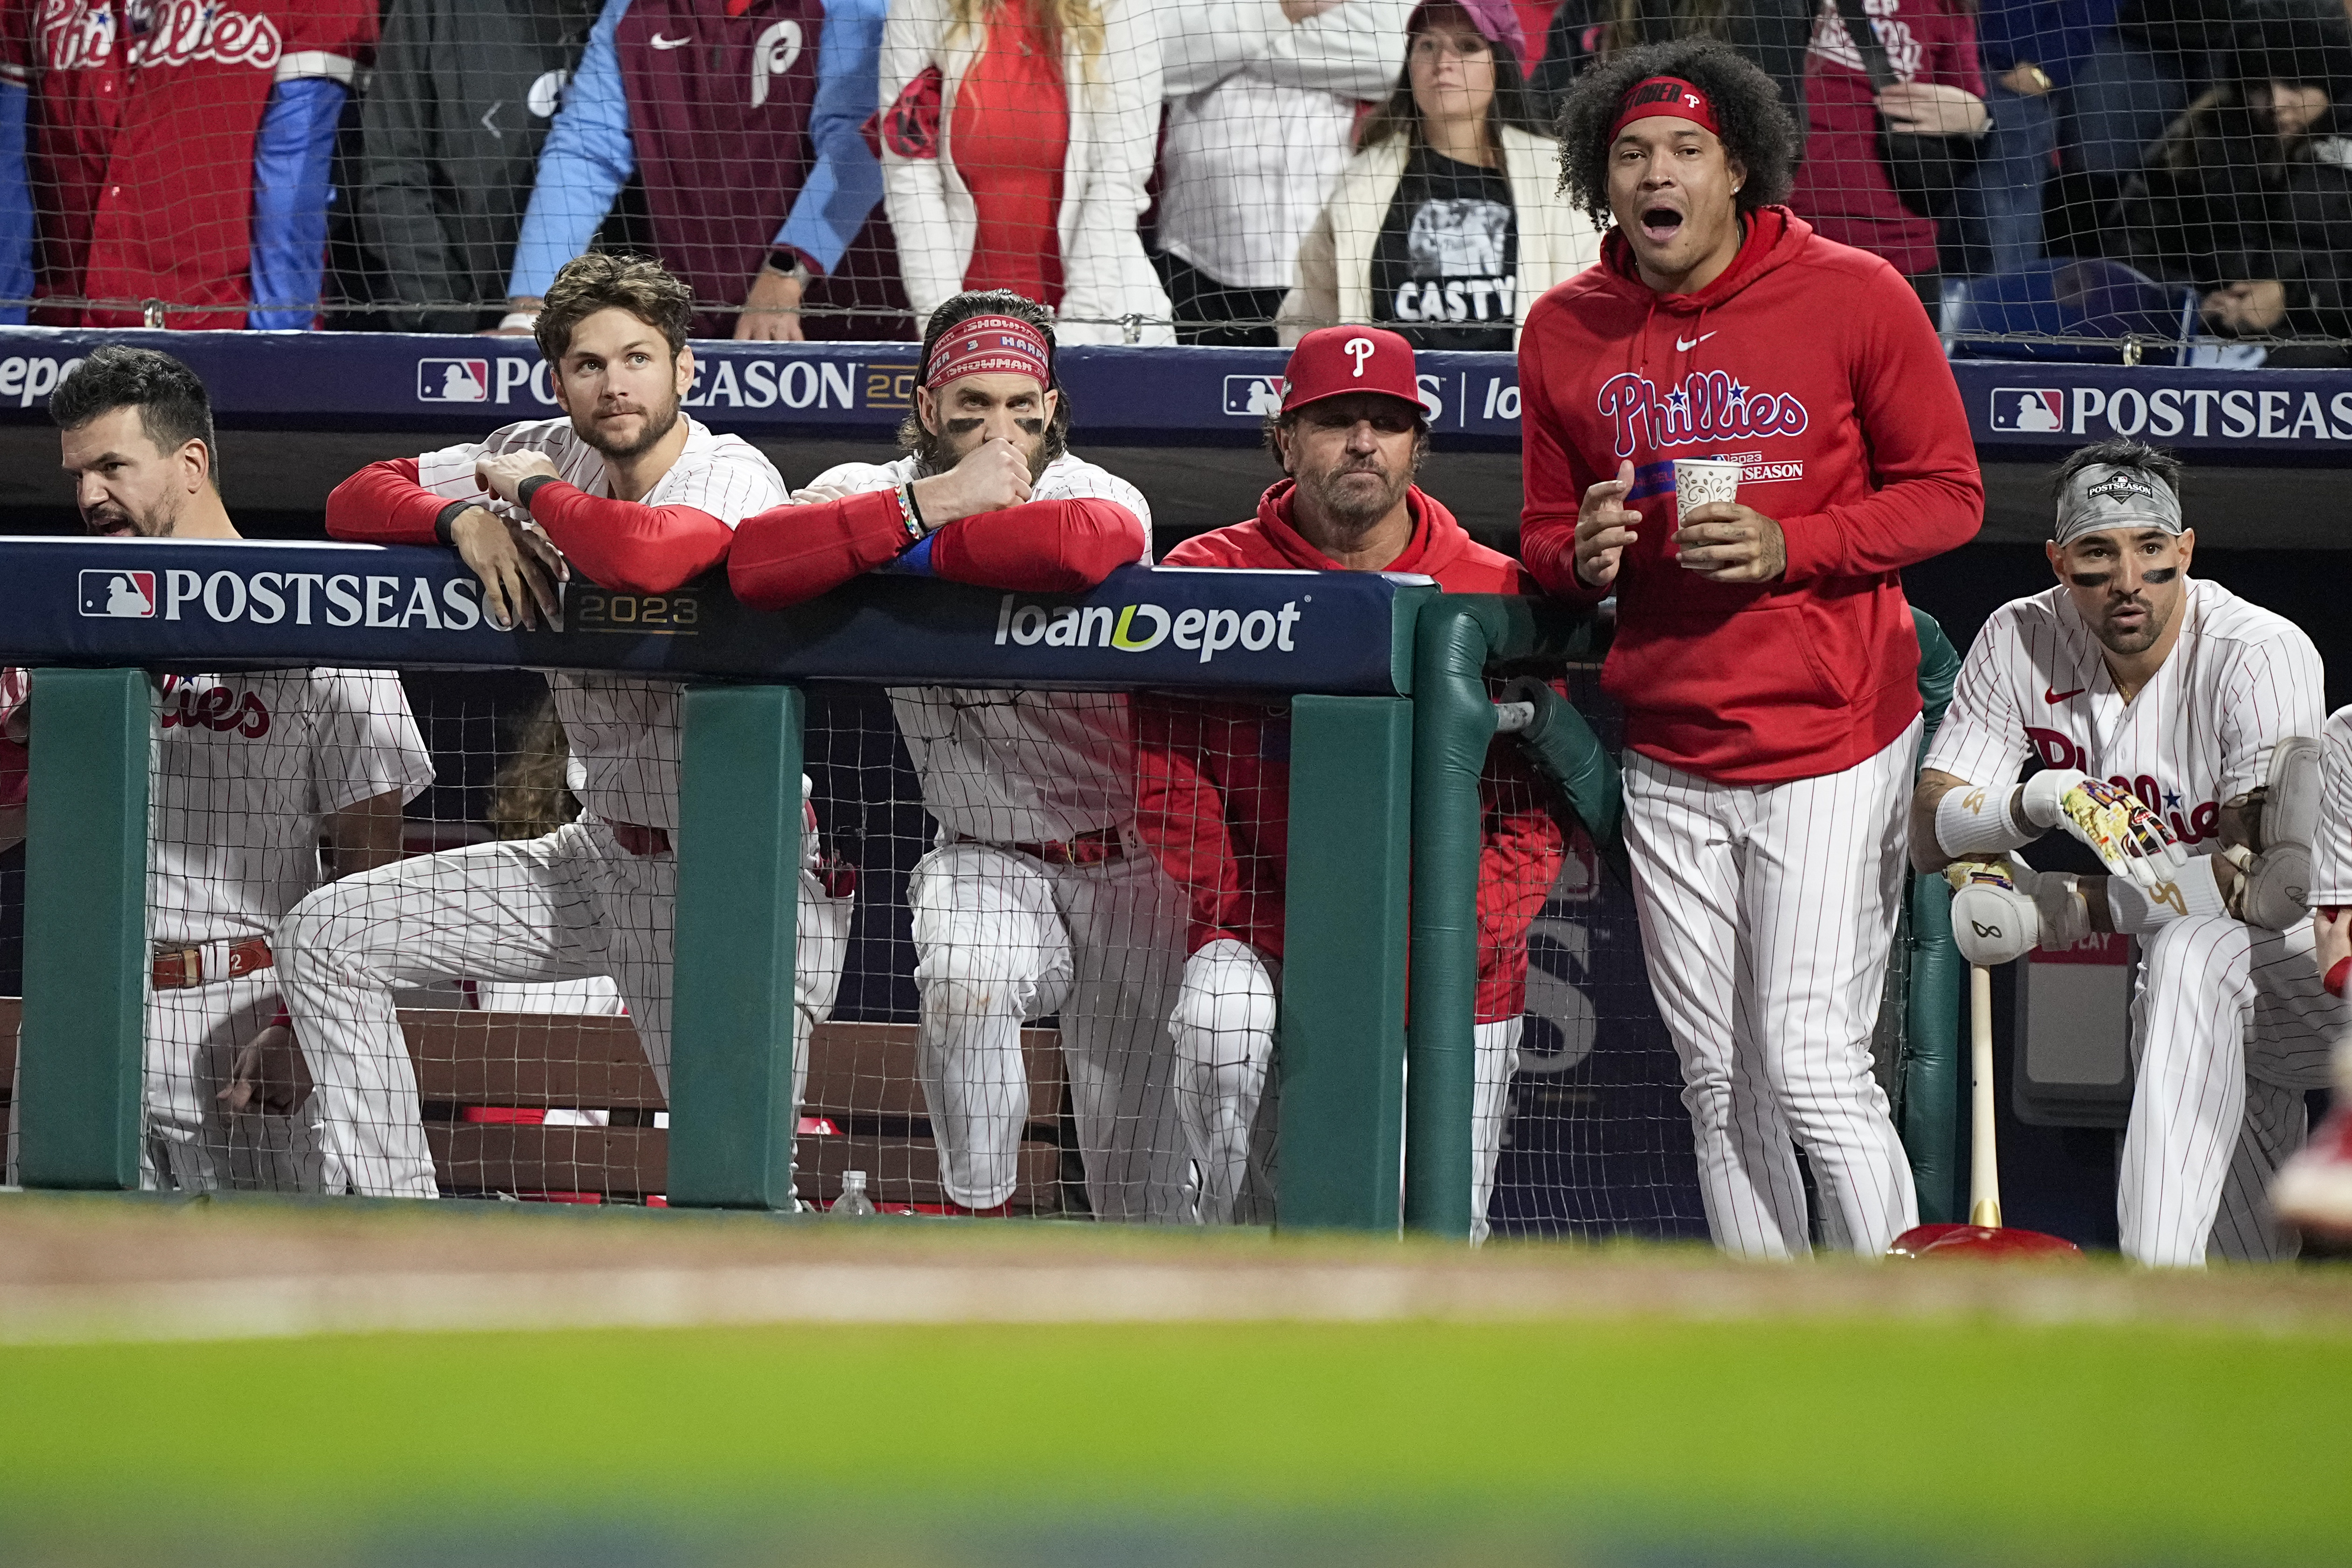 Phillies Fan Went to Wrong Stadium for World Series Game: No One